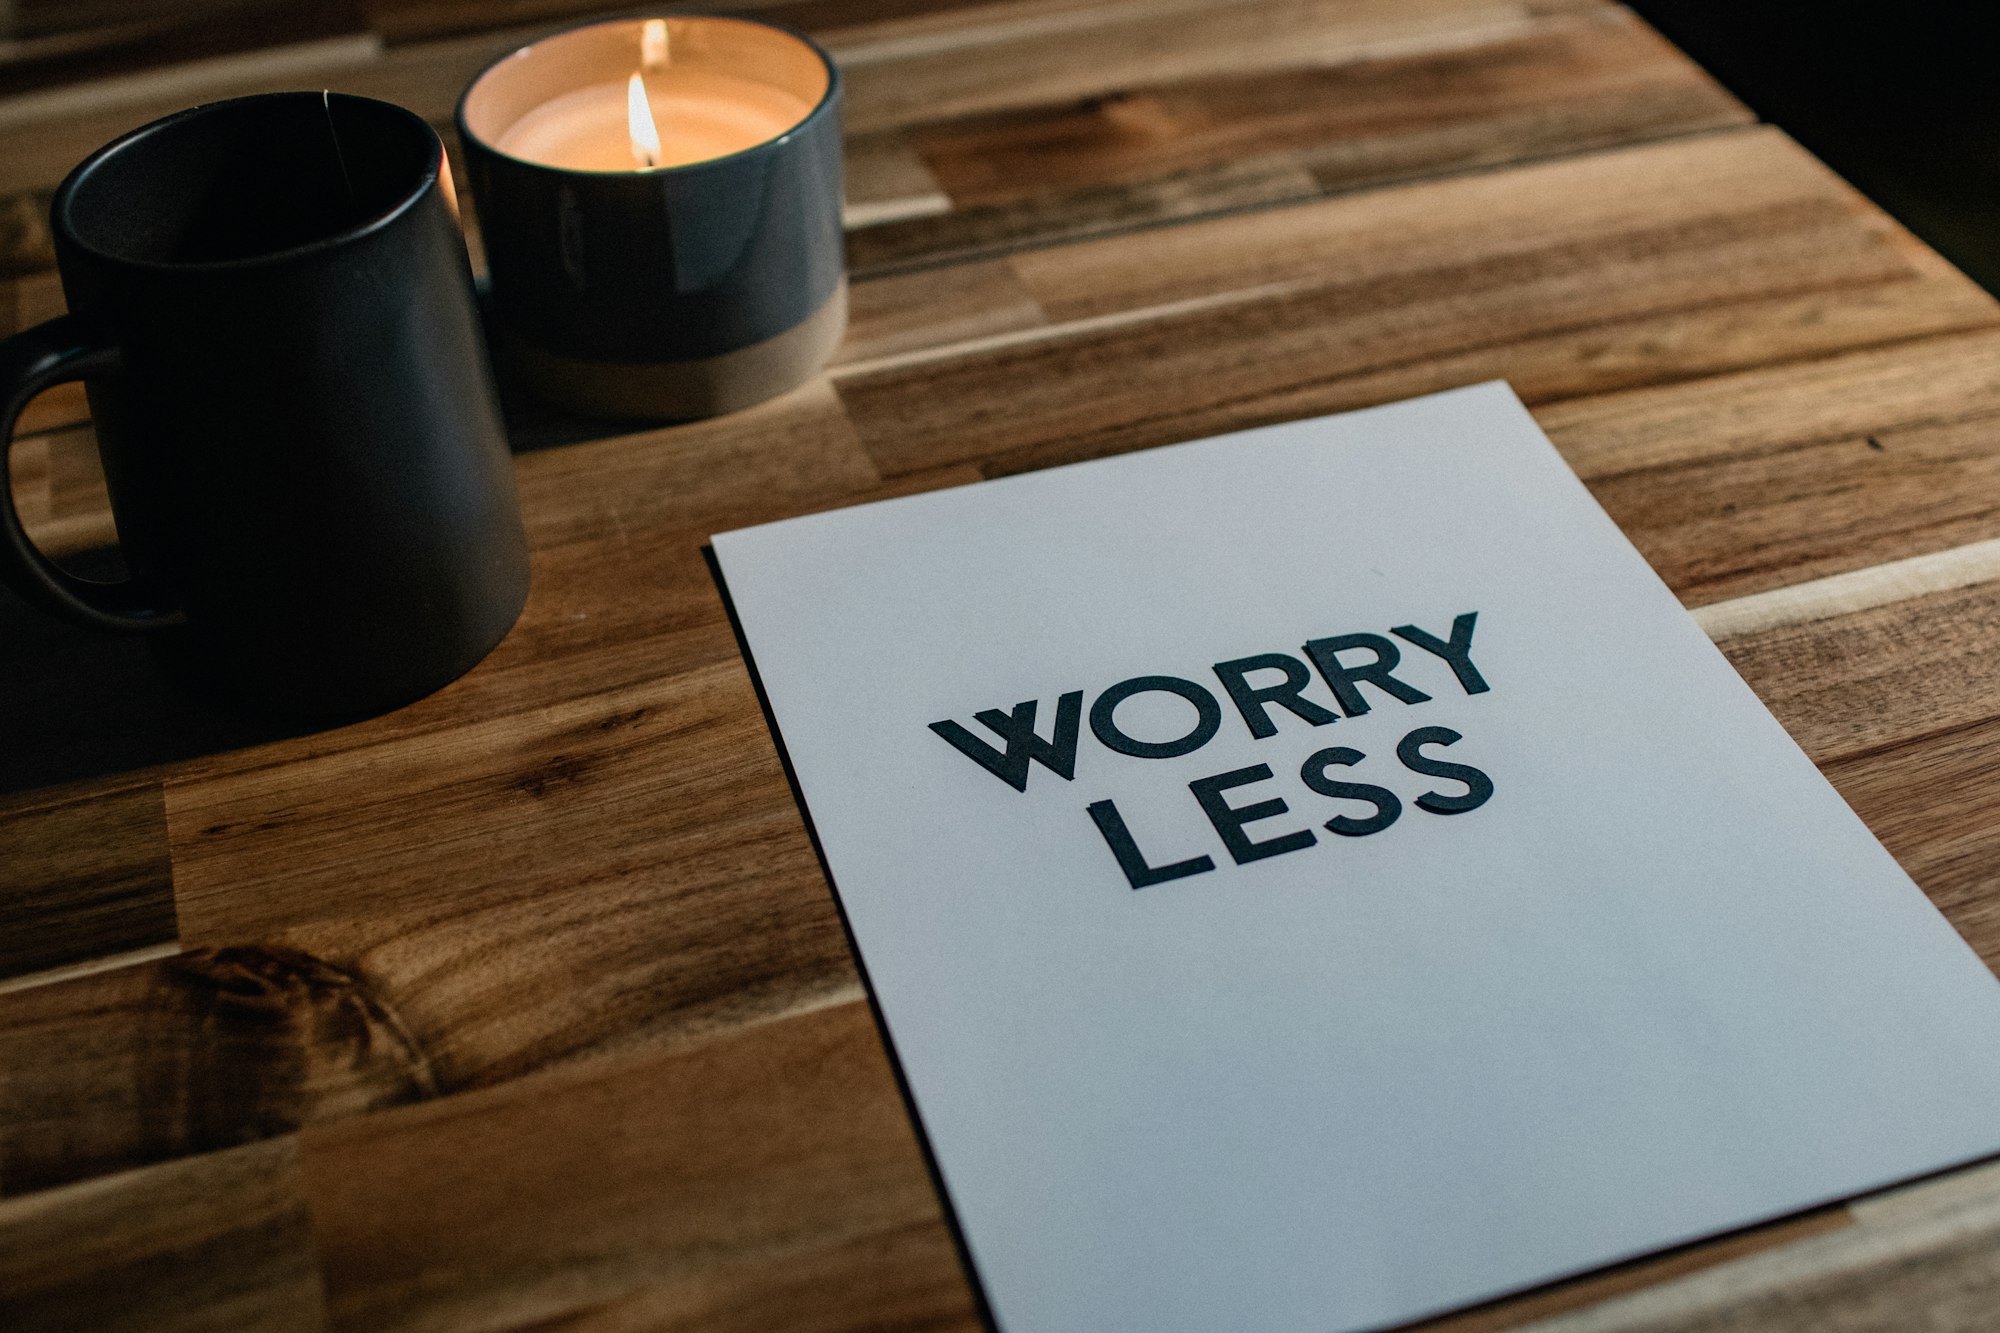 Worry Less message on a wooden table